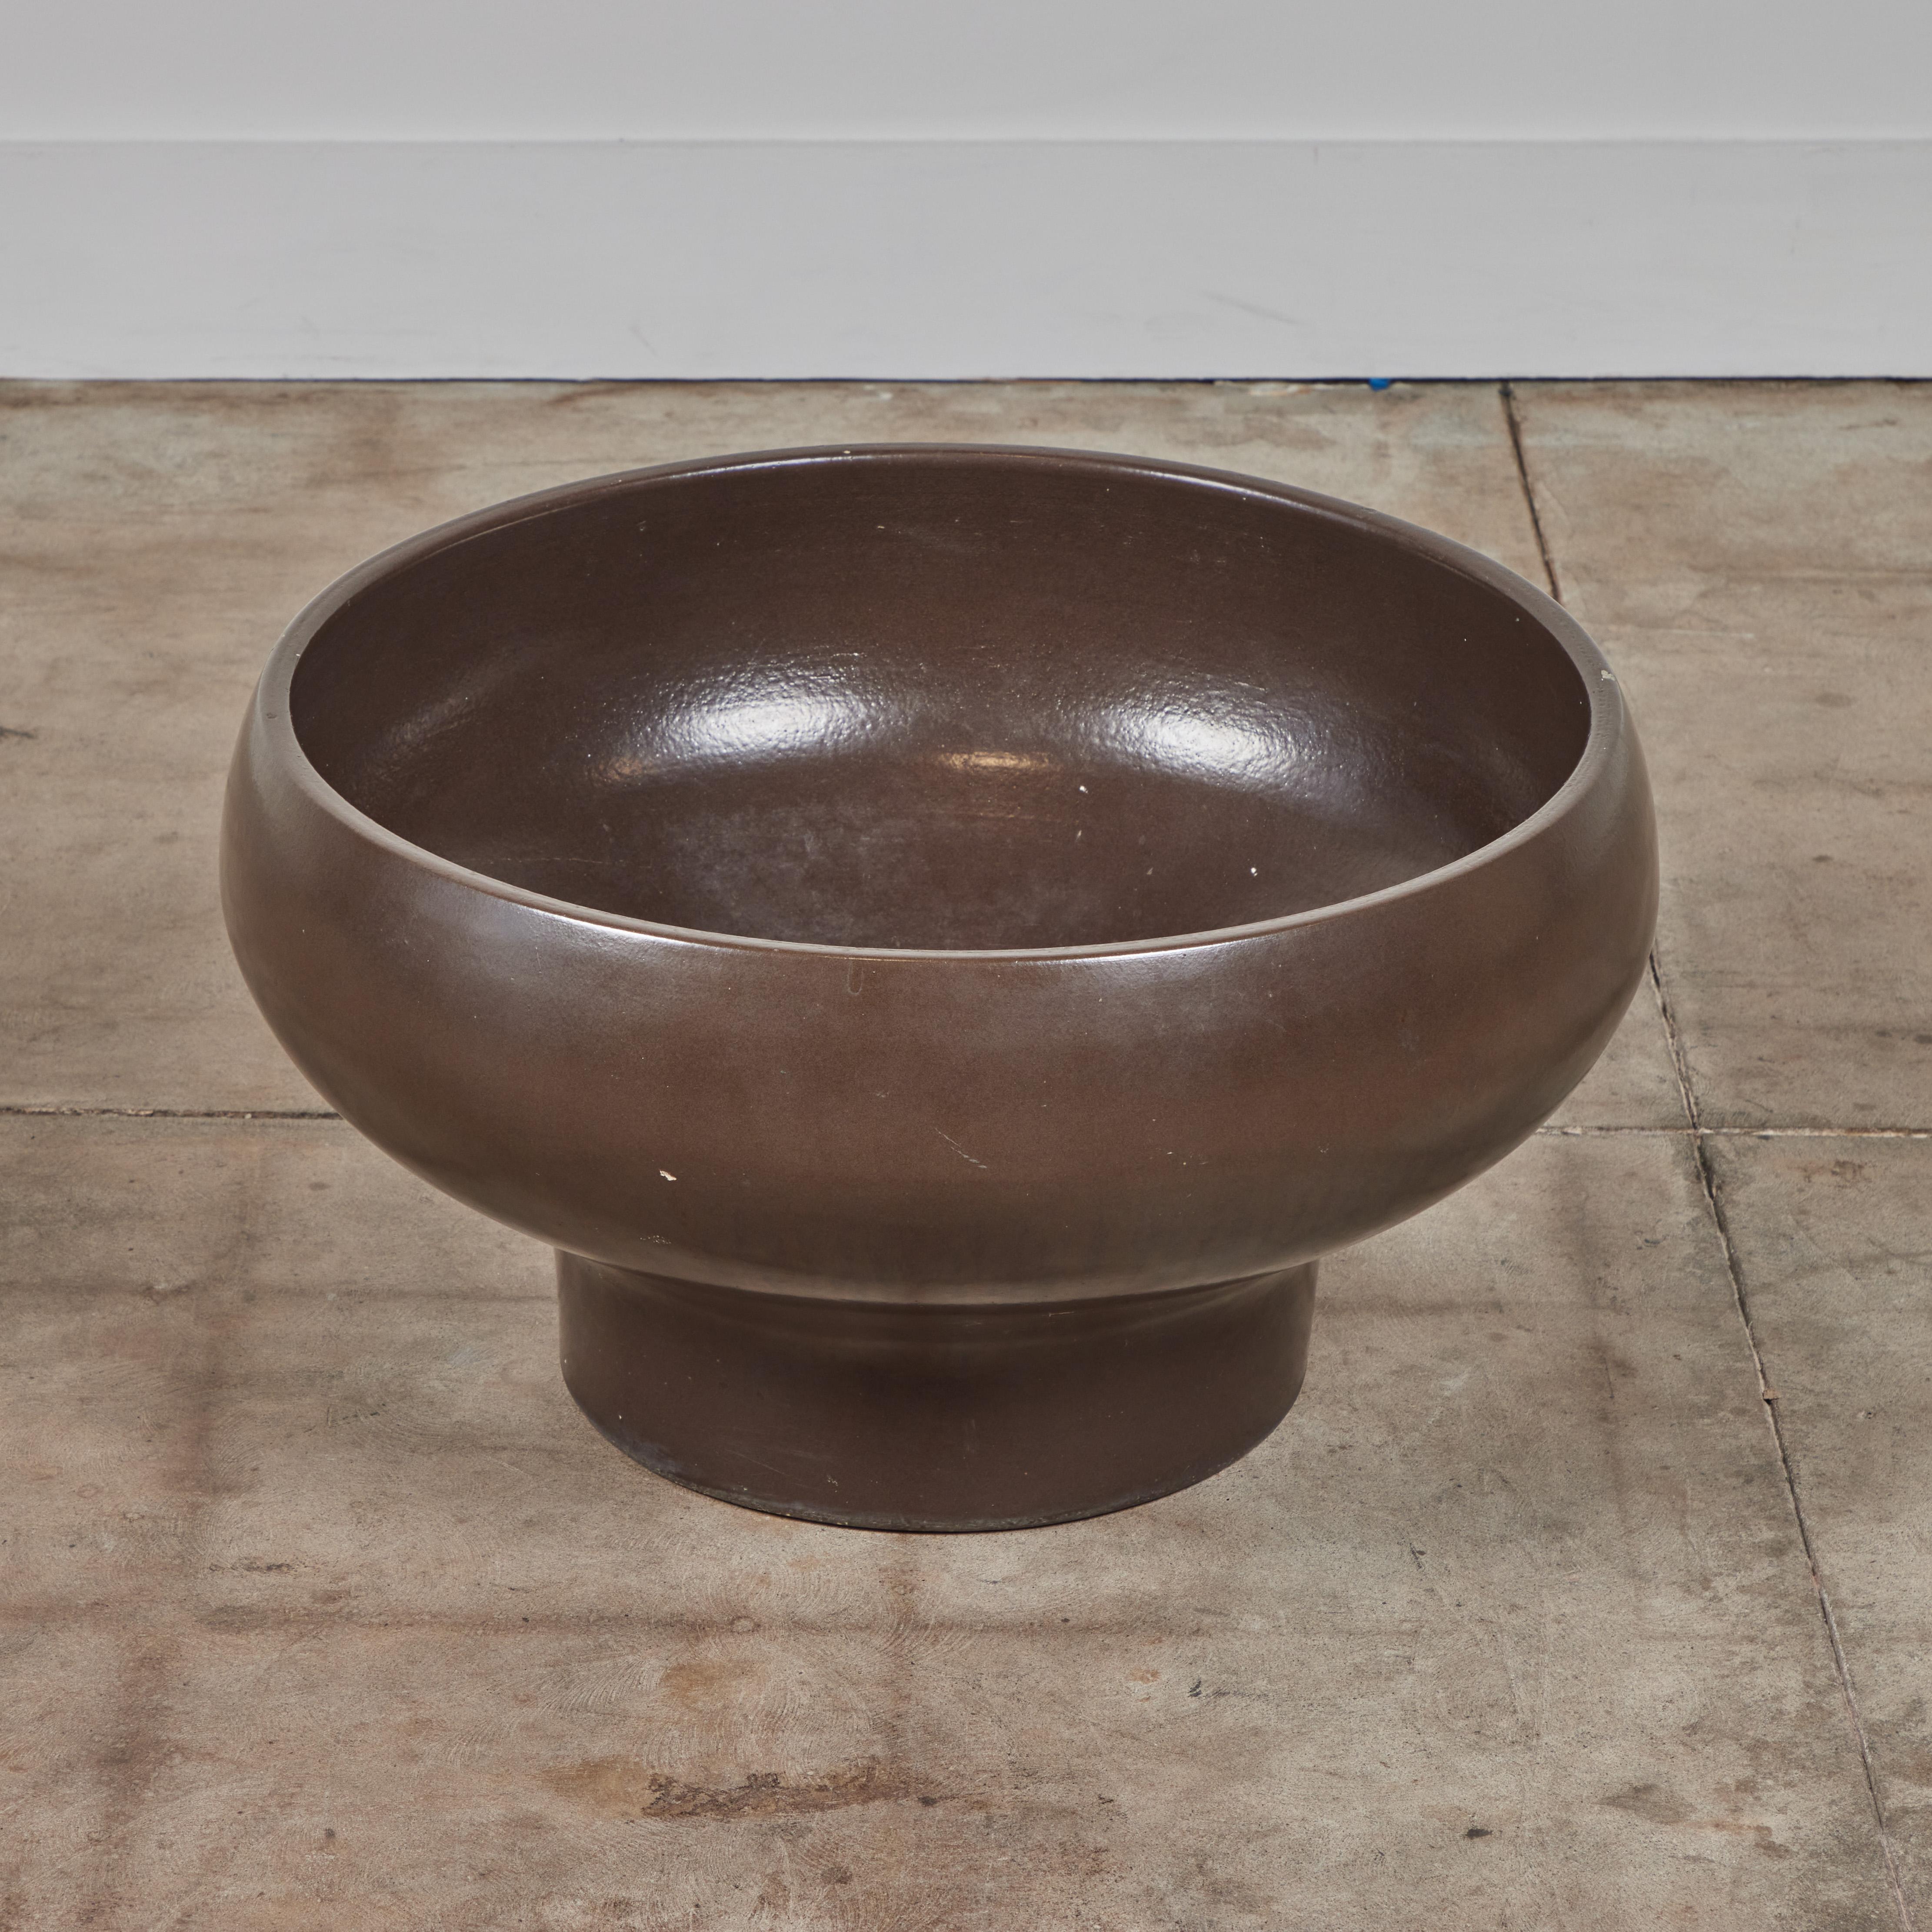 David Cressey Pro/Artisan Mocha Glazed Bowl Planter for Architectural Pottery In Excellent Condition For Sale In Los Angeles, CA